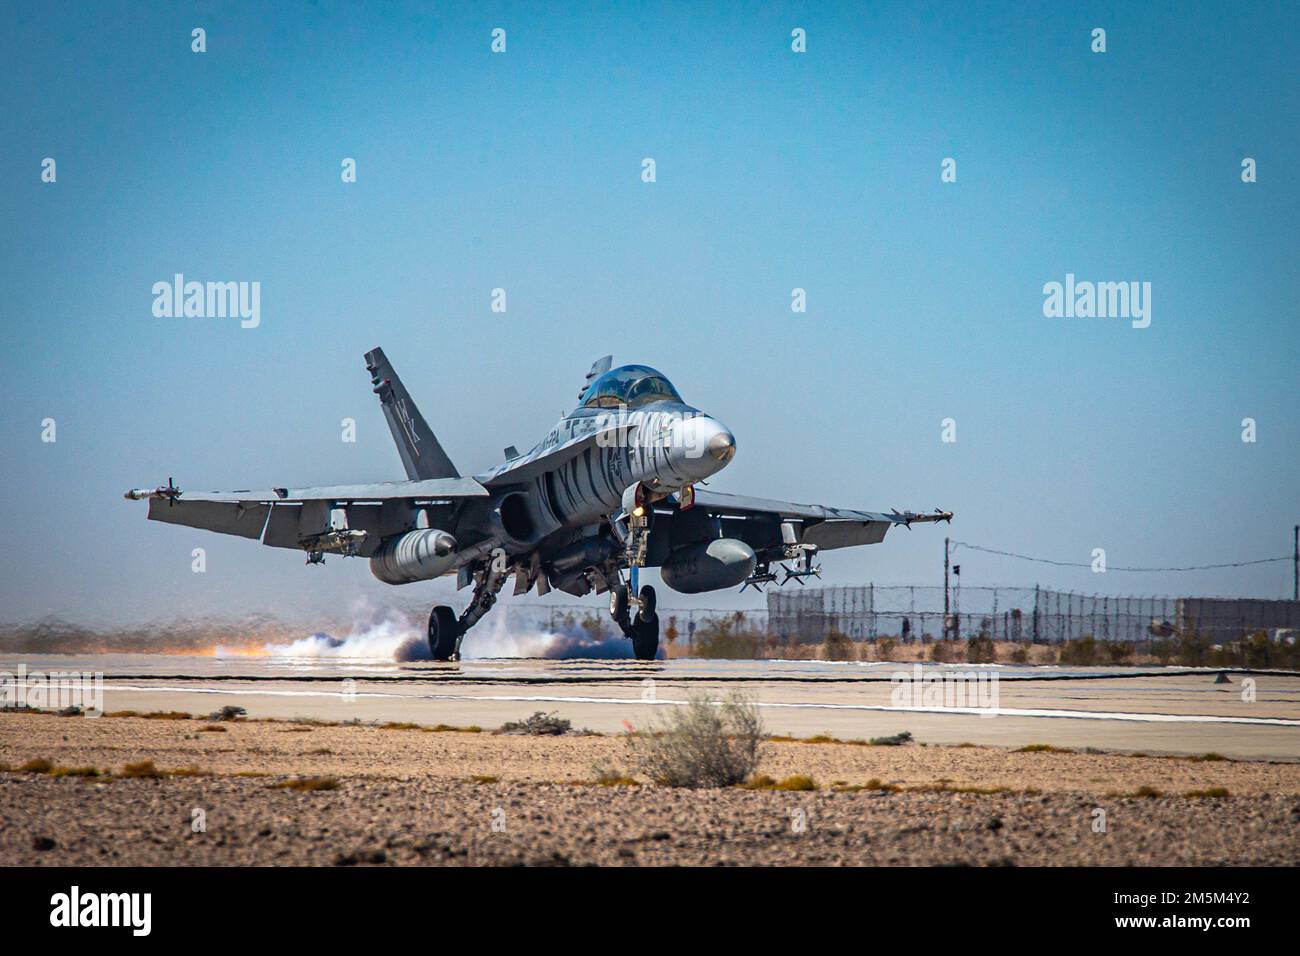 A U.S. Marine Corps F/A-18 Hornet conducts a mock emergency landing, during an emergency arresting exercise during the Weapons and Tactics Instructor (WTI) course 2-22, at Marine Corps Air Station Yuma, Arizona, March 24, 2022. WTI is a seven-week training event hosted by MAWTS-1, providing standardized advanced tactical training and certification of unit instructor qualifications to support Marine aviation training and readiness, and assists in developing and employing aviation weapons and tactics. Stock Photo